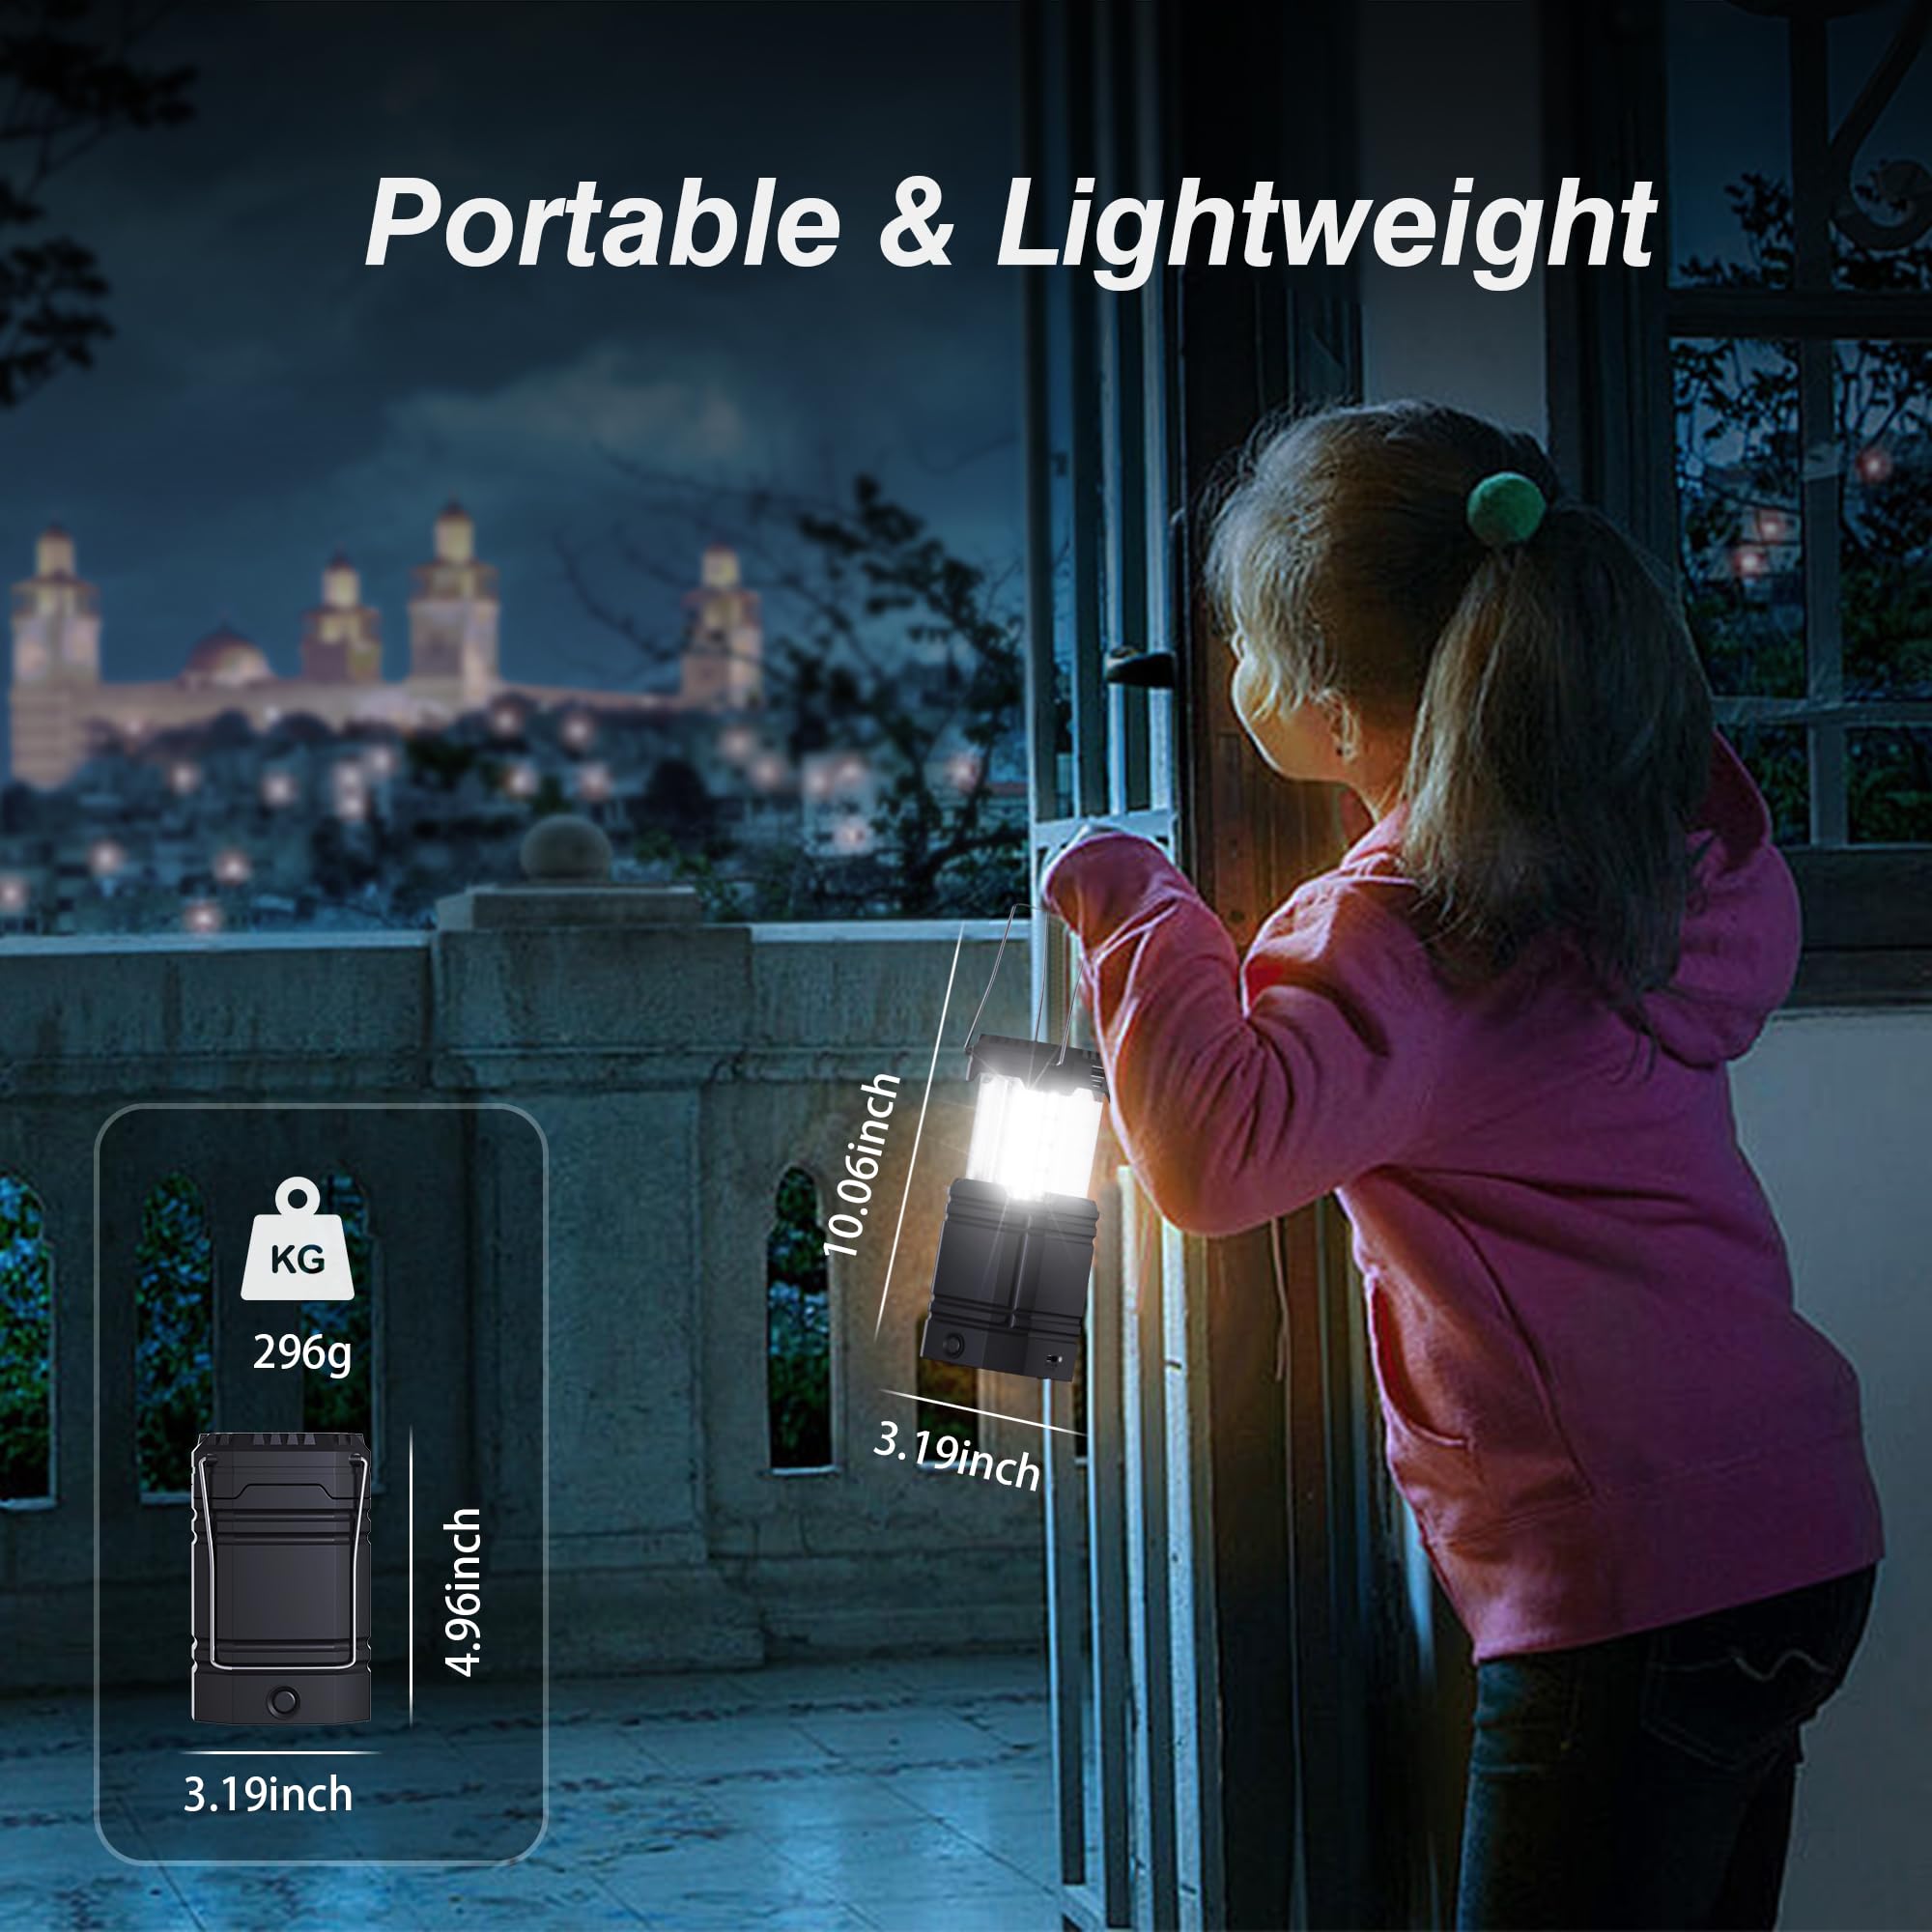 3000 Large Capacity Hand Crank Solar Camping Lantern, Portable Ultra Bright LED Torch, 23-26 Hours Running Time, USB Charger, Electronic Lantern for Outdoor